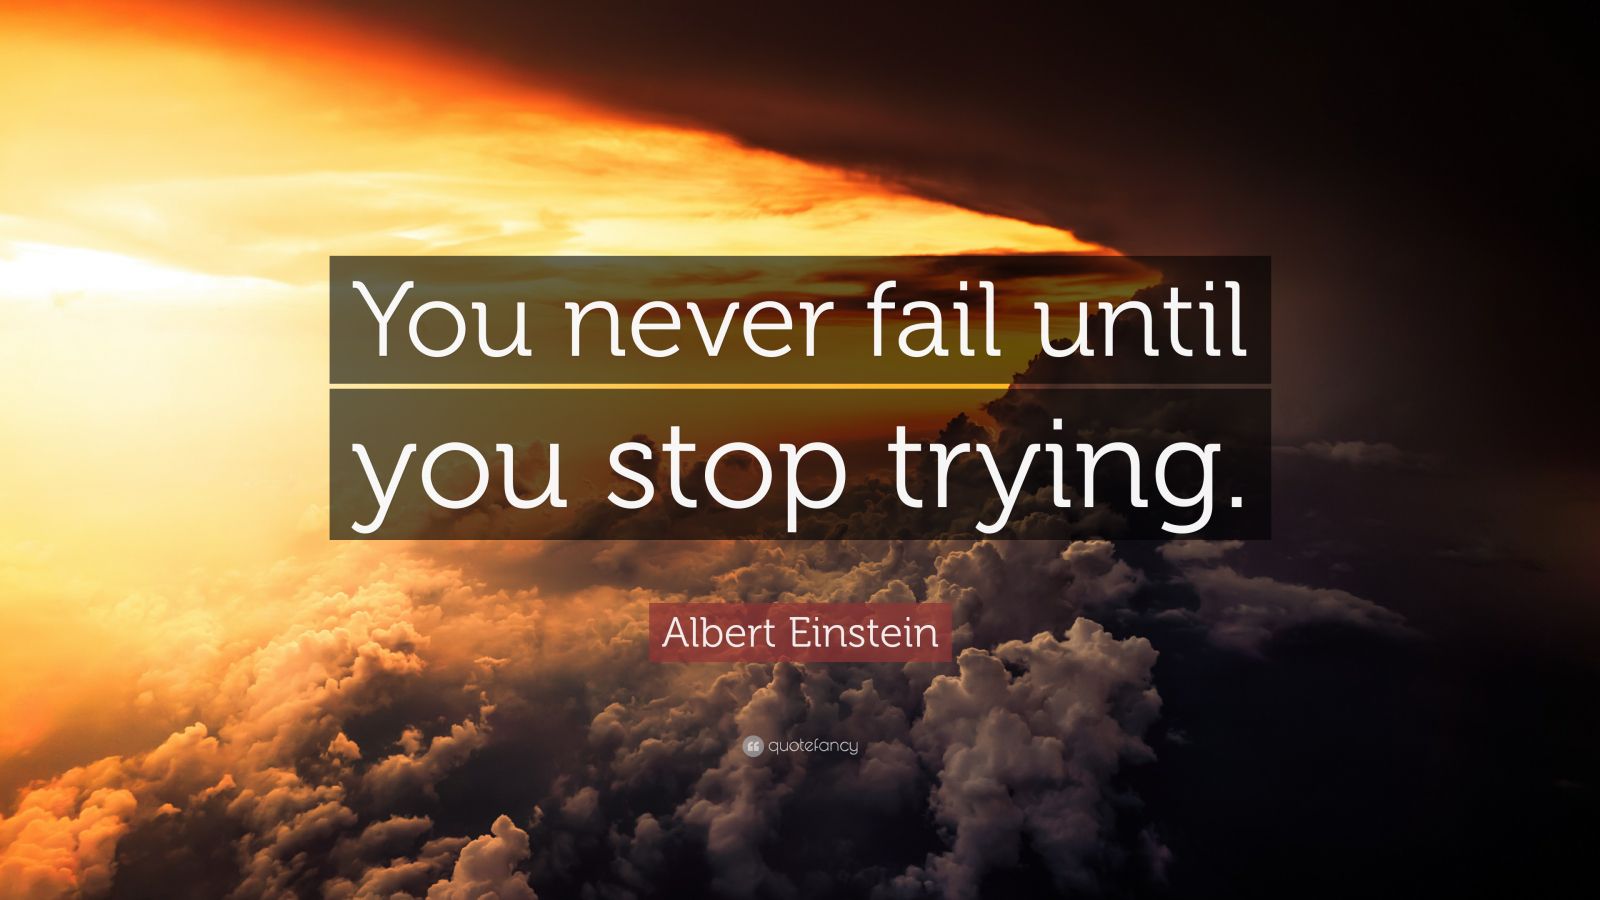 Albert Einstein Quote: “You never fail until you stop trying.” (35